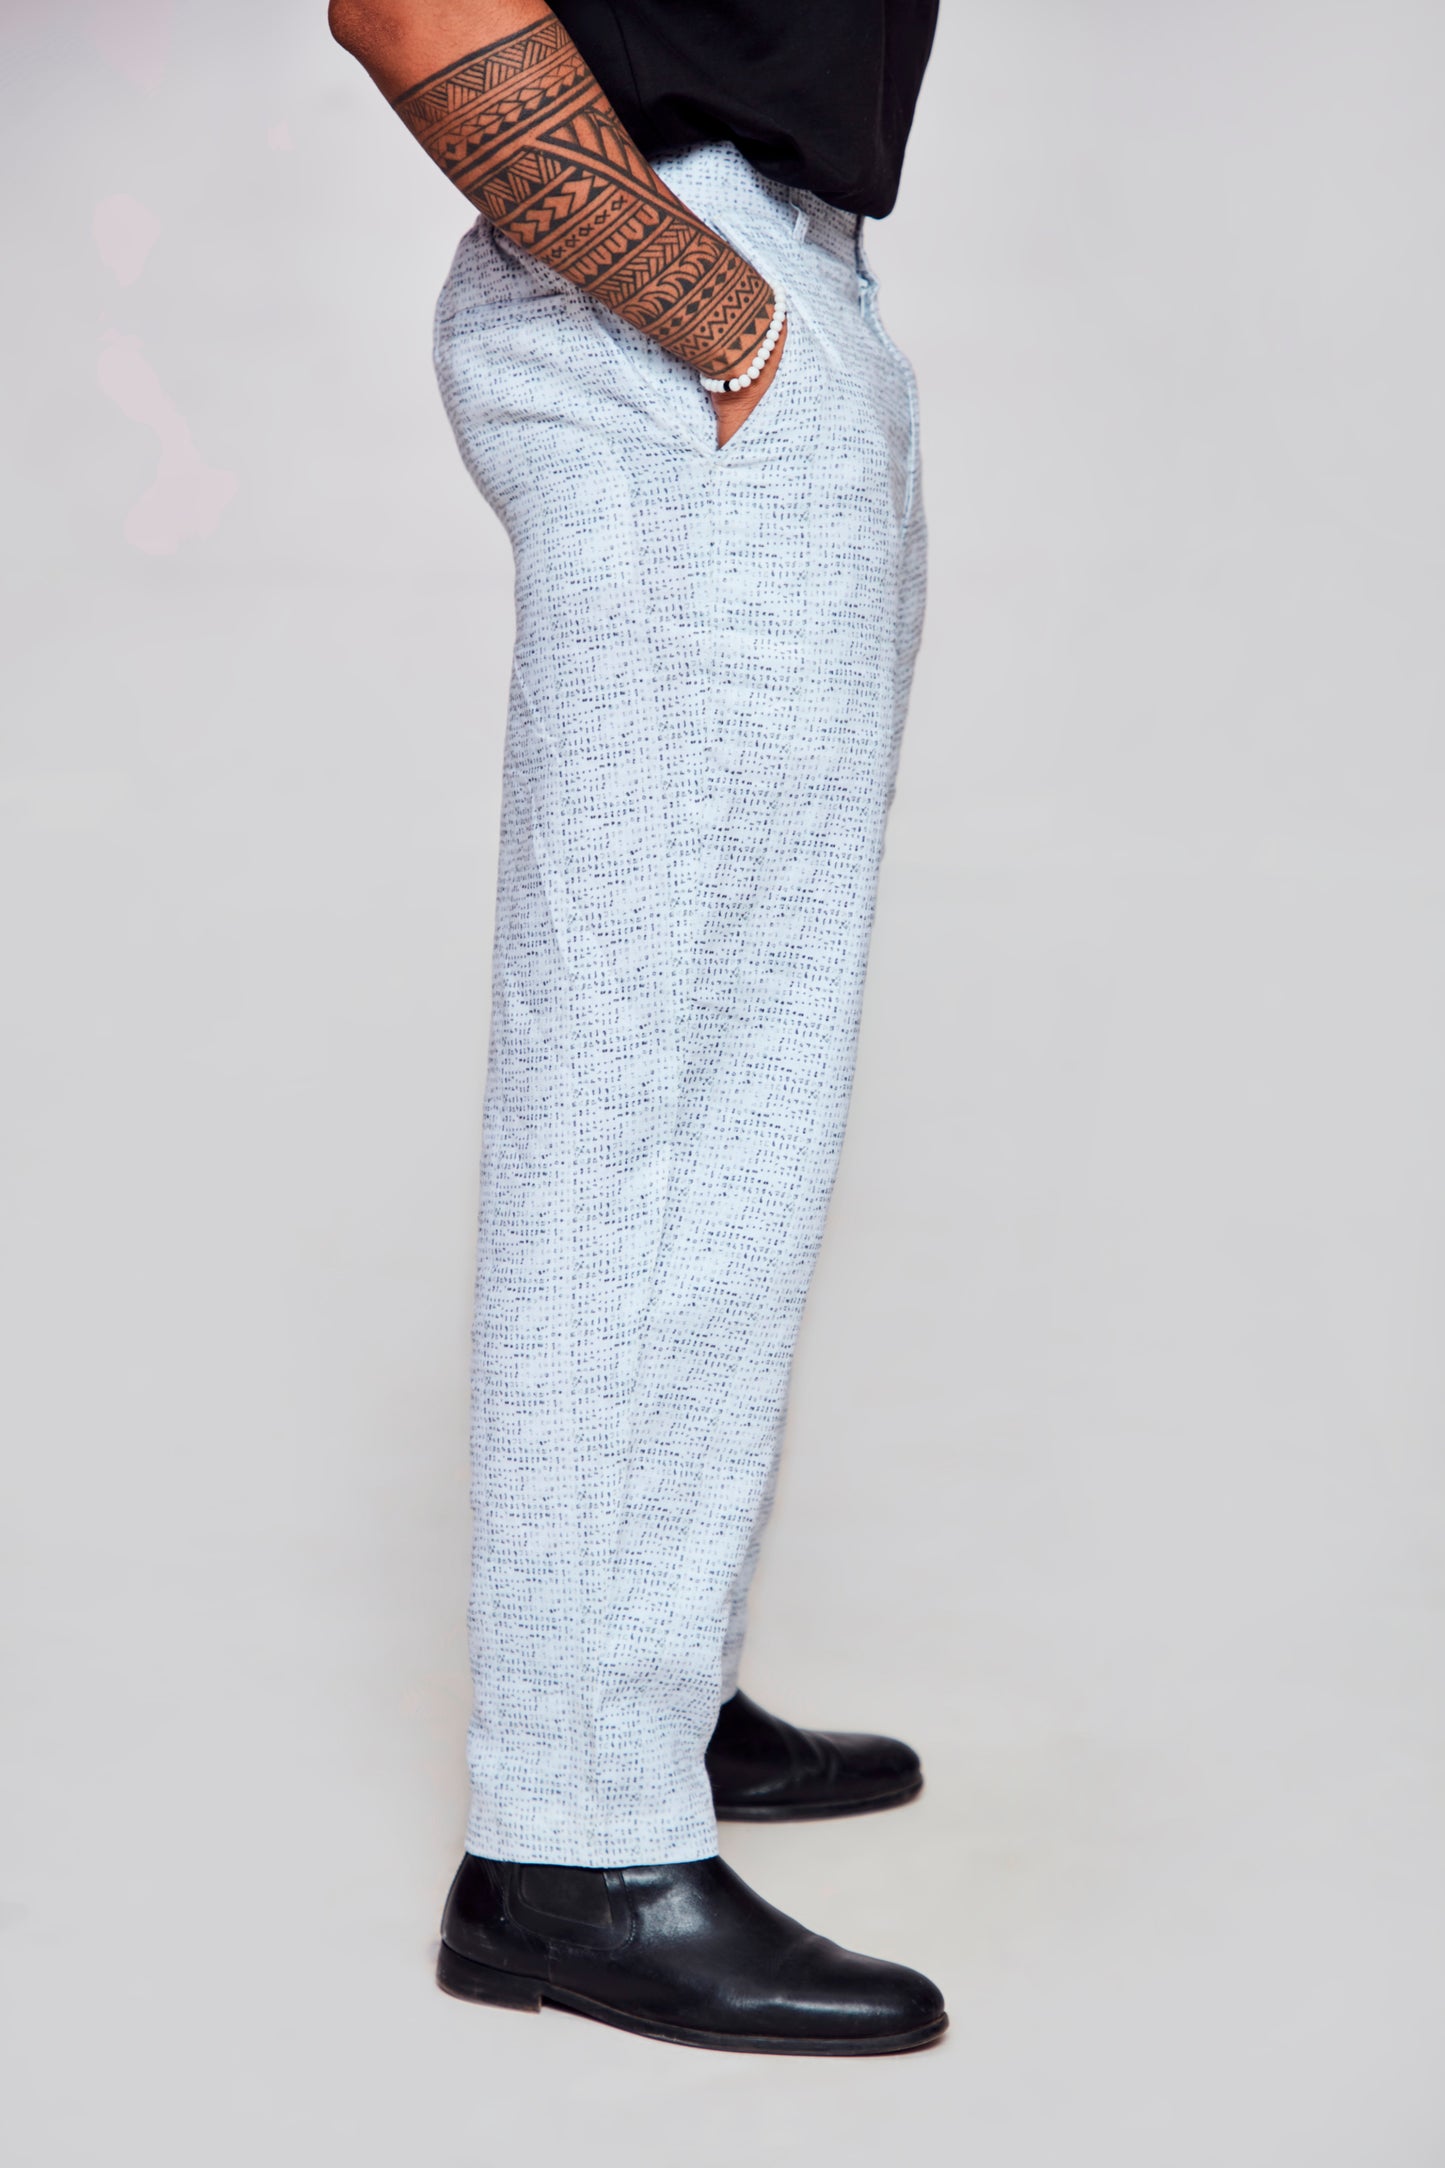 Dot white :Pure Linen Loose Tapered Fit Pant